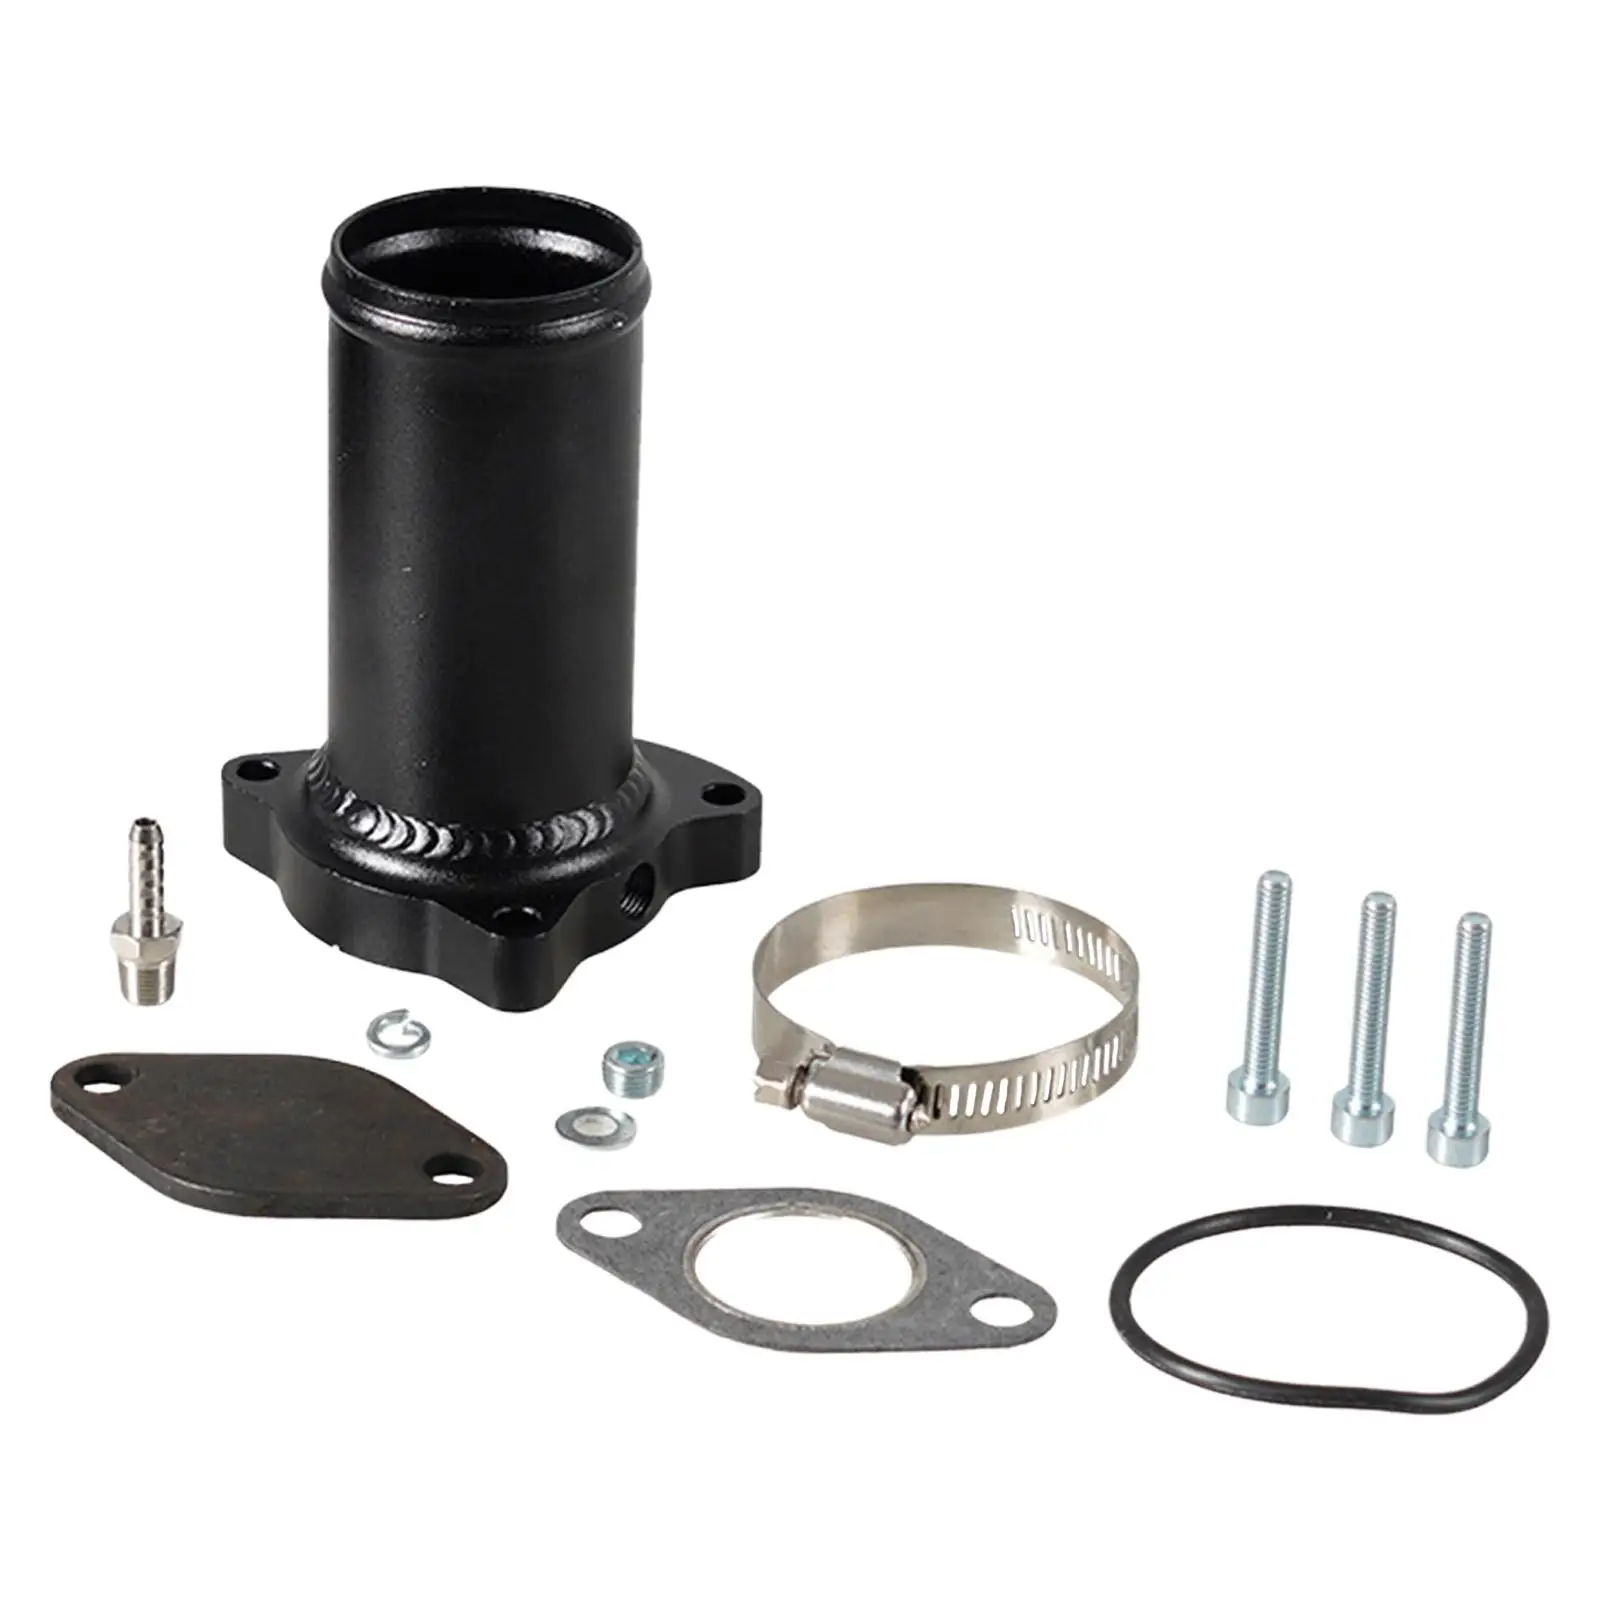 Egr Delete Kit Fit for 1.9 8V Tdi Ve 90 110 Spare Parts Easy to Install High Performance